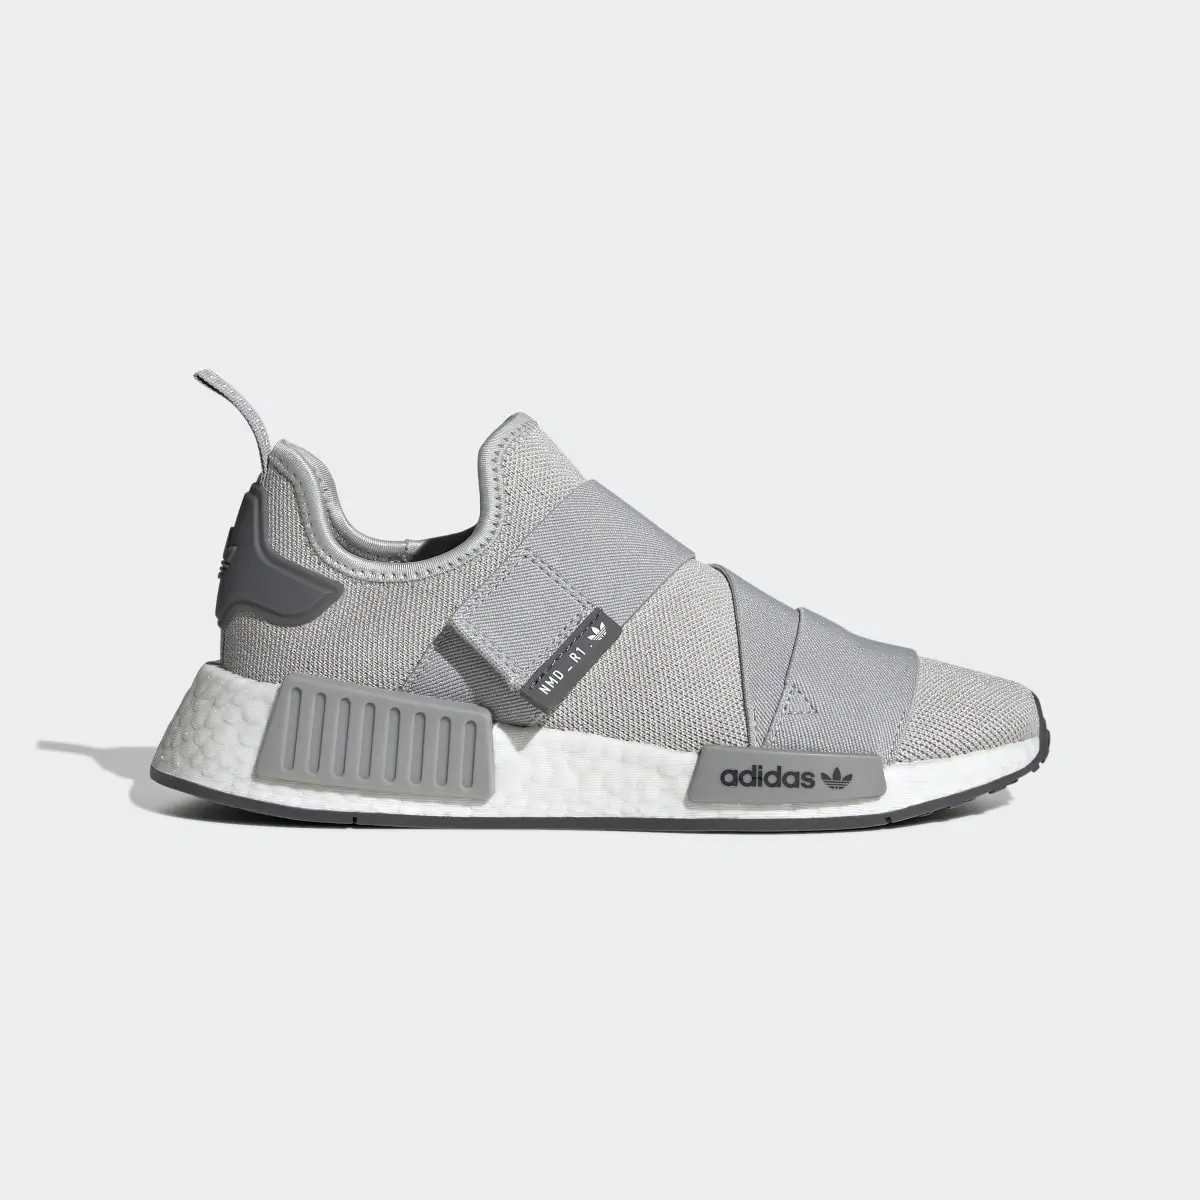 Adidas NMD_R1 Strap Shoes. 2